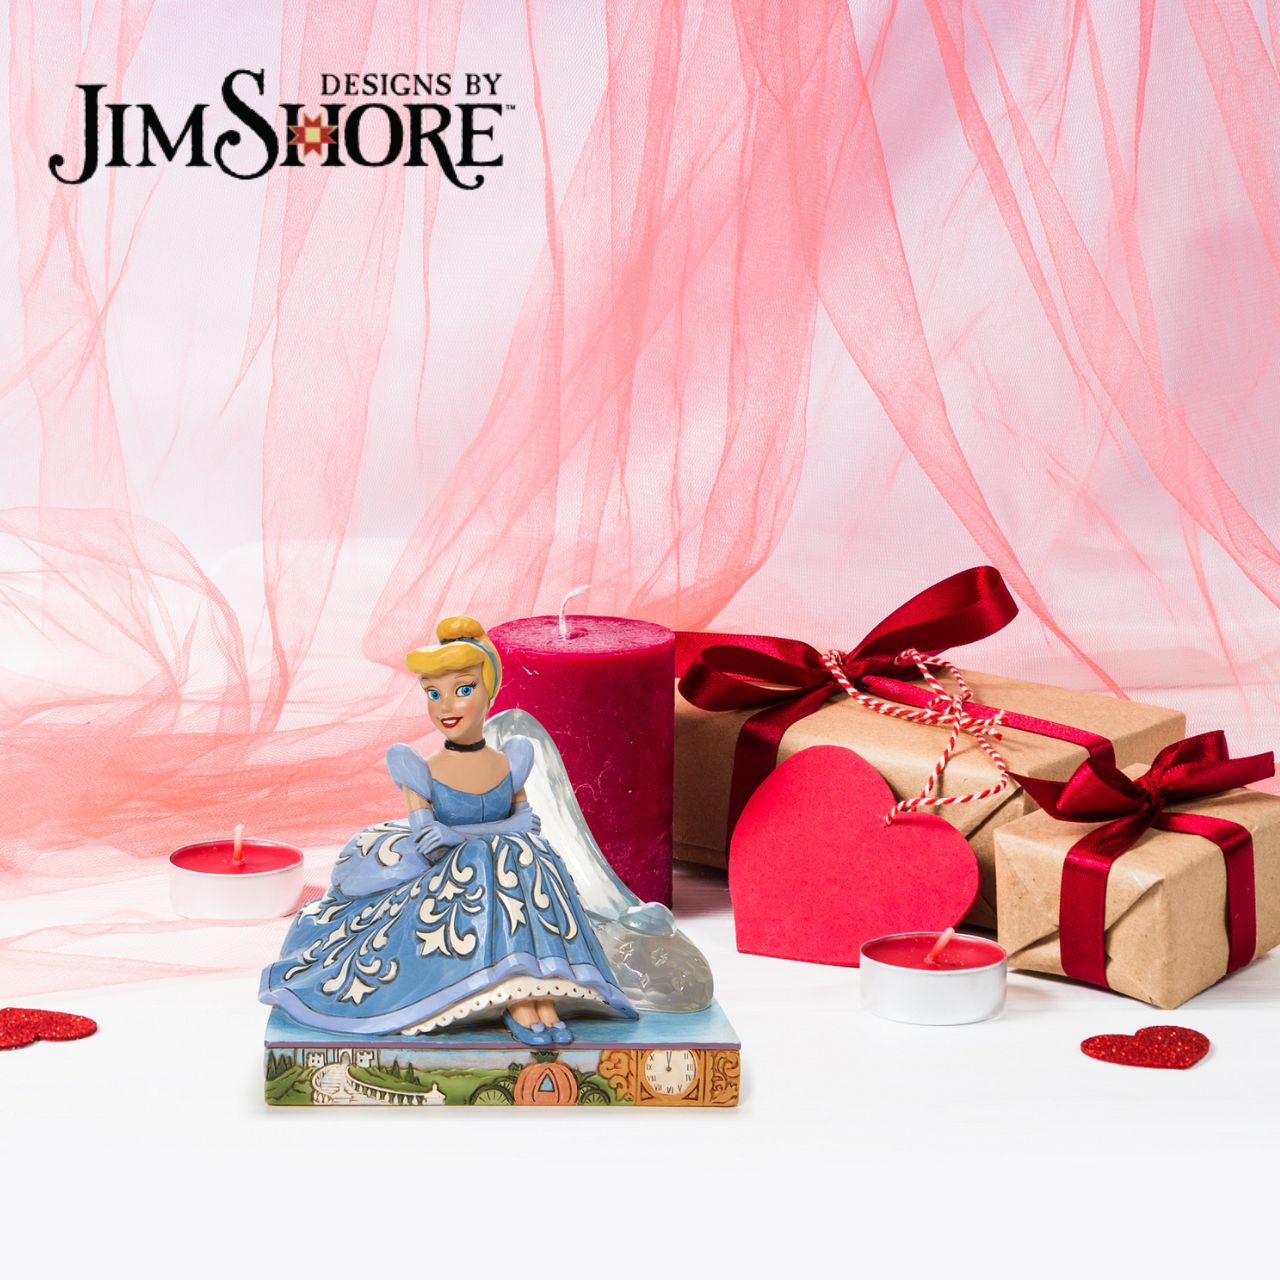 Disney Traditions Cinderella Glass Slipper Figurine  This Disney Traditions line by Jim Shore features iconic Walt Disney princesses with their famous props highlighted. With a base illustrating her story, this piece features Cinderella in her brilliant blue gown with a glass slipper.